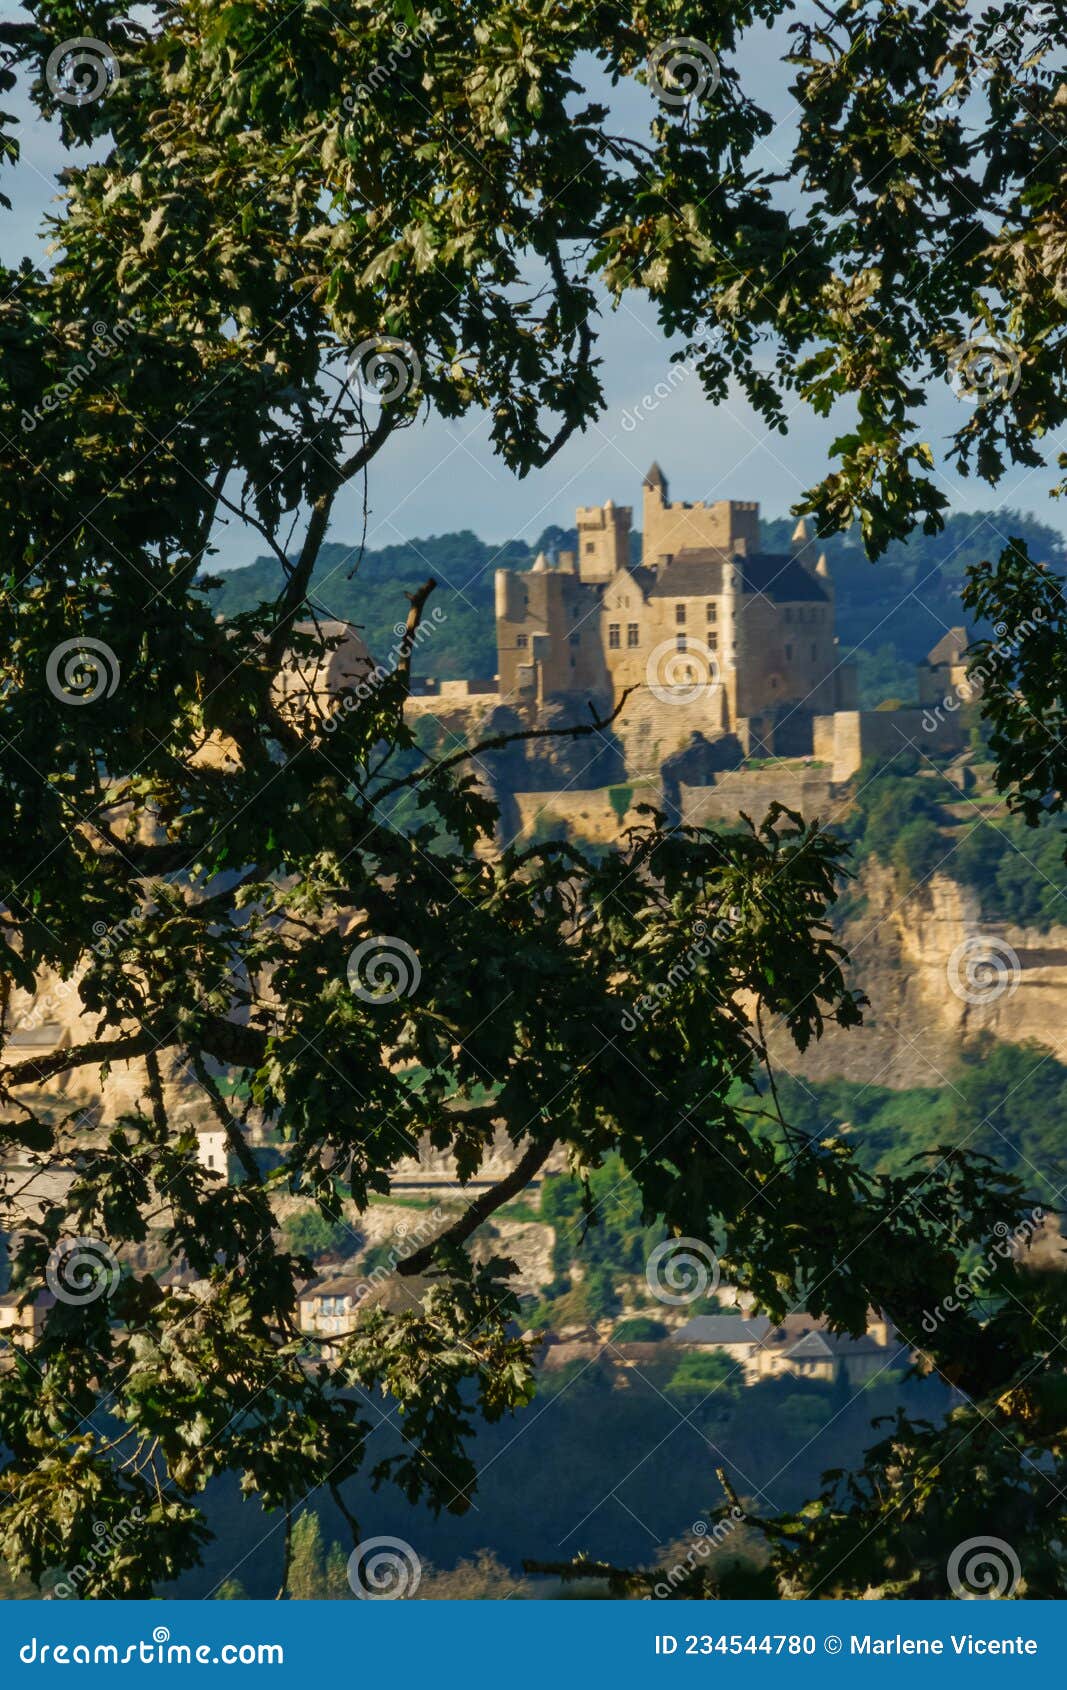 views of the castelnaud castle in the dordogne valley from vÃÂ¨zac. france